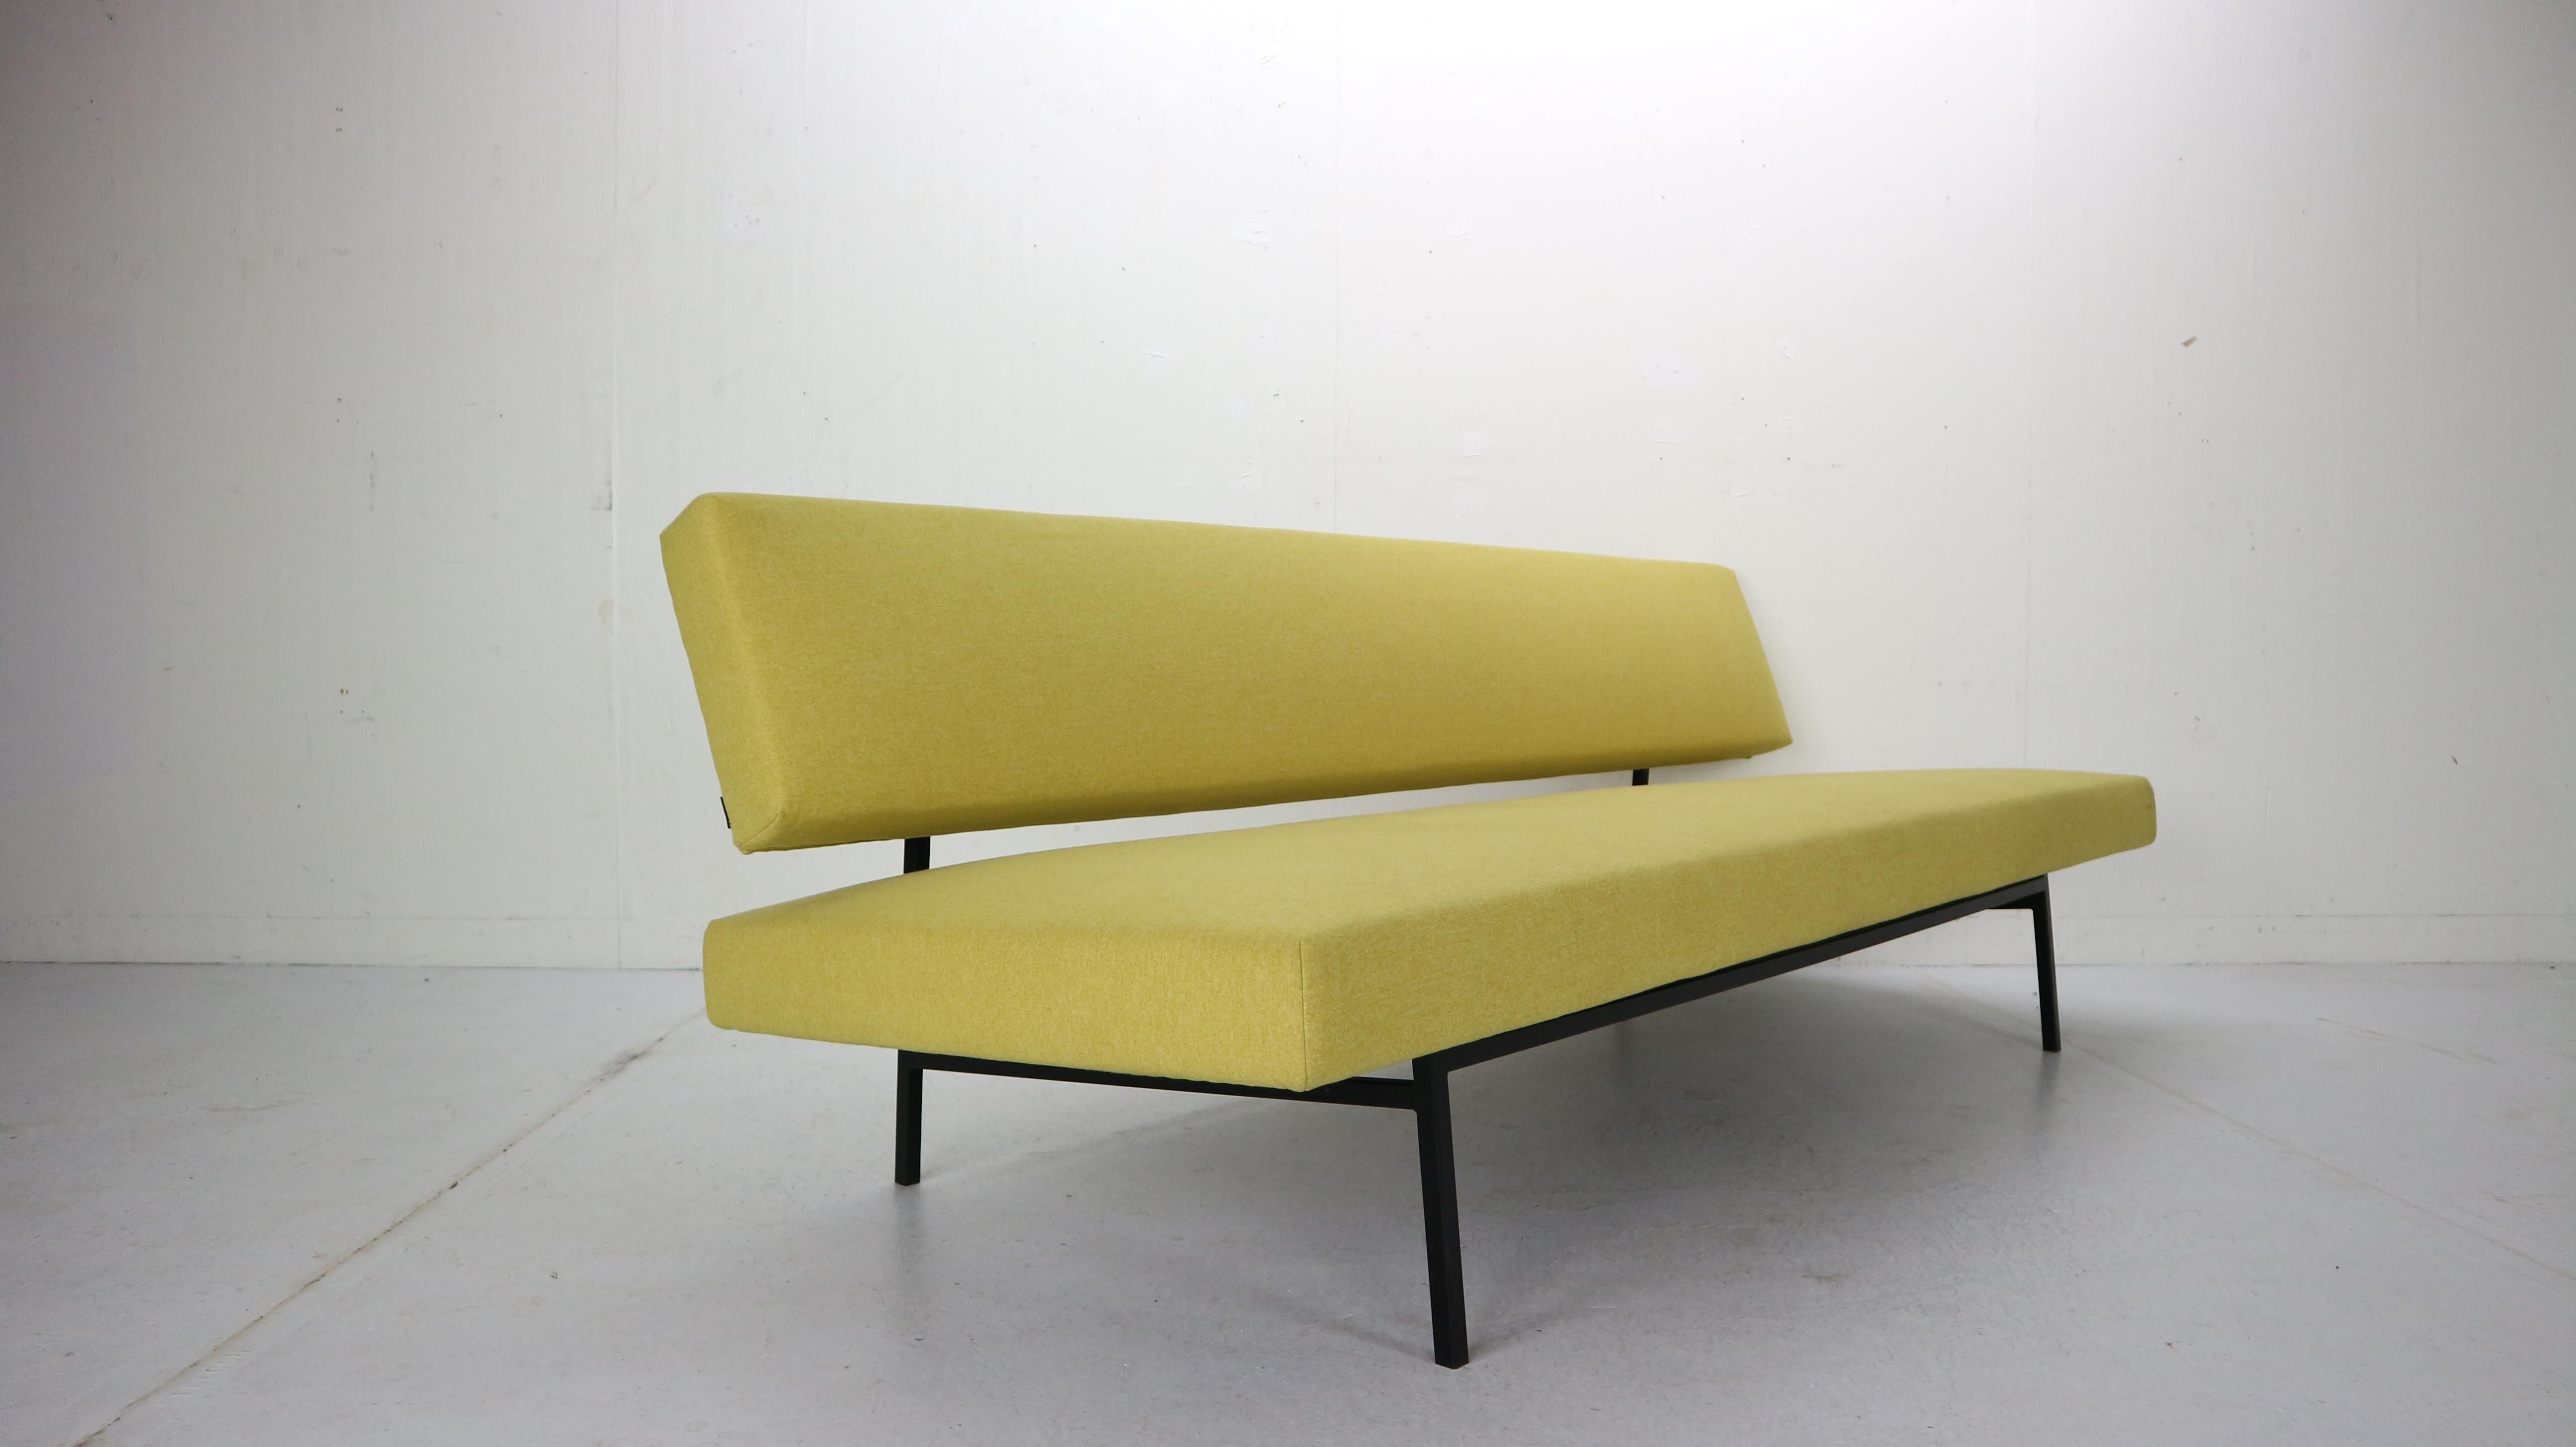 Beautiful minimalistic design sleeping sofa or daybed designed by Rob Parry for Gelderland in circa 1960, the Netherlands.
Rob Parry was a student and employee of Gerrit Rietveld. 

This eye-catching sofa has a beautiful steel base and newly